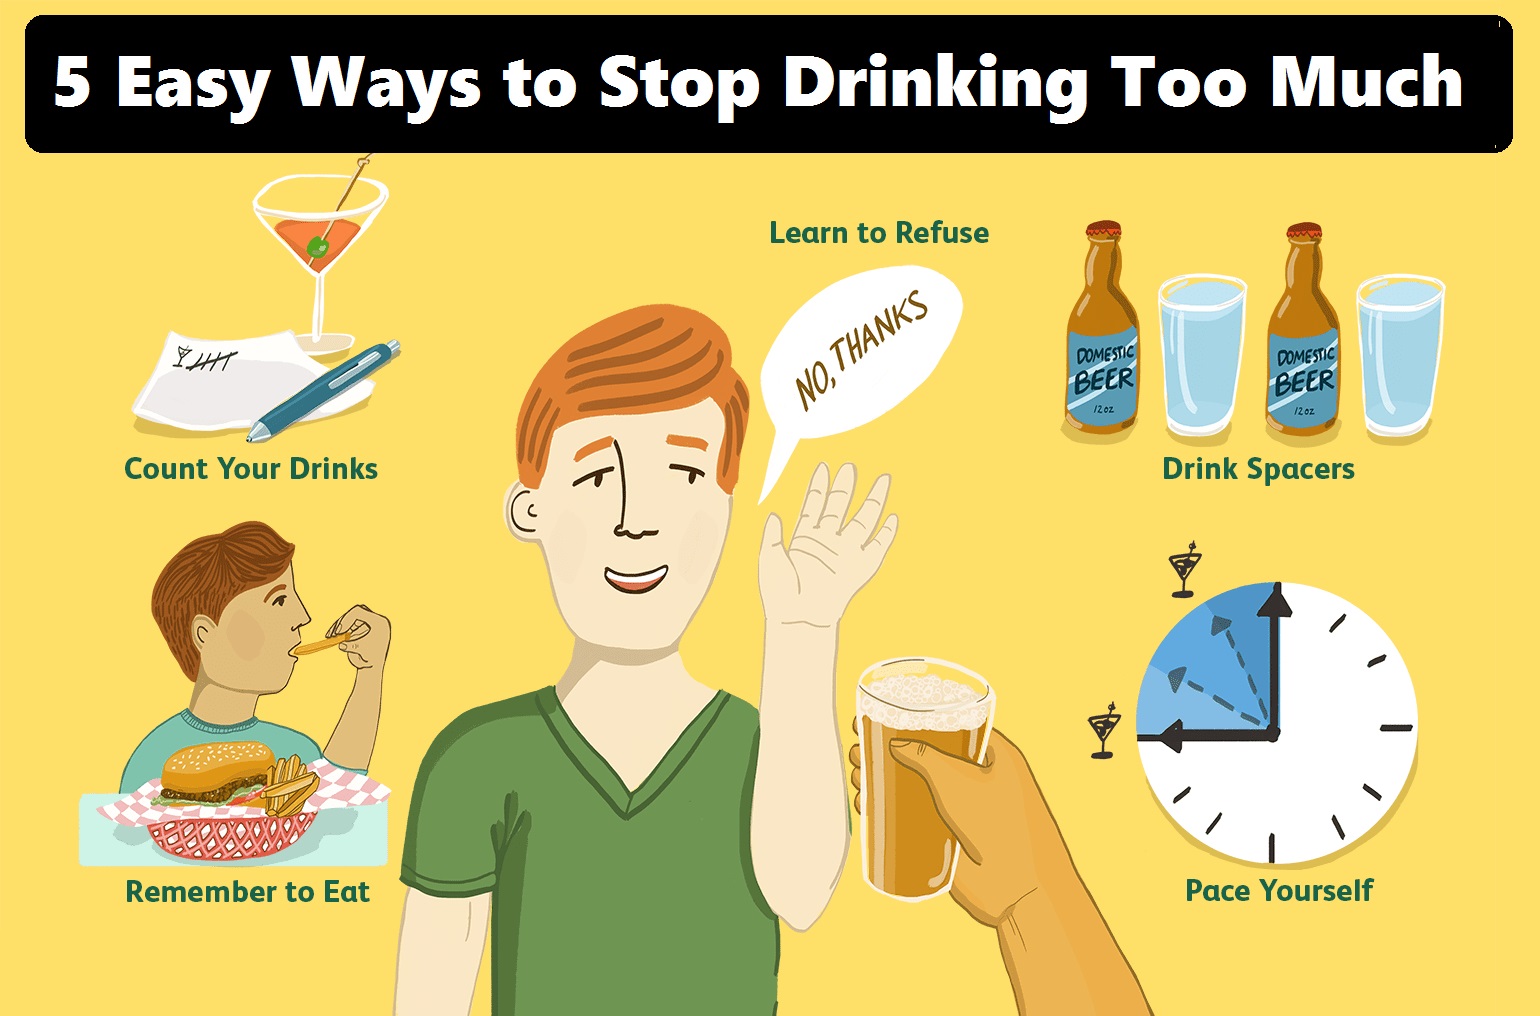 5 Easy Ways to Stop Drinking Too Much